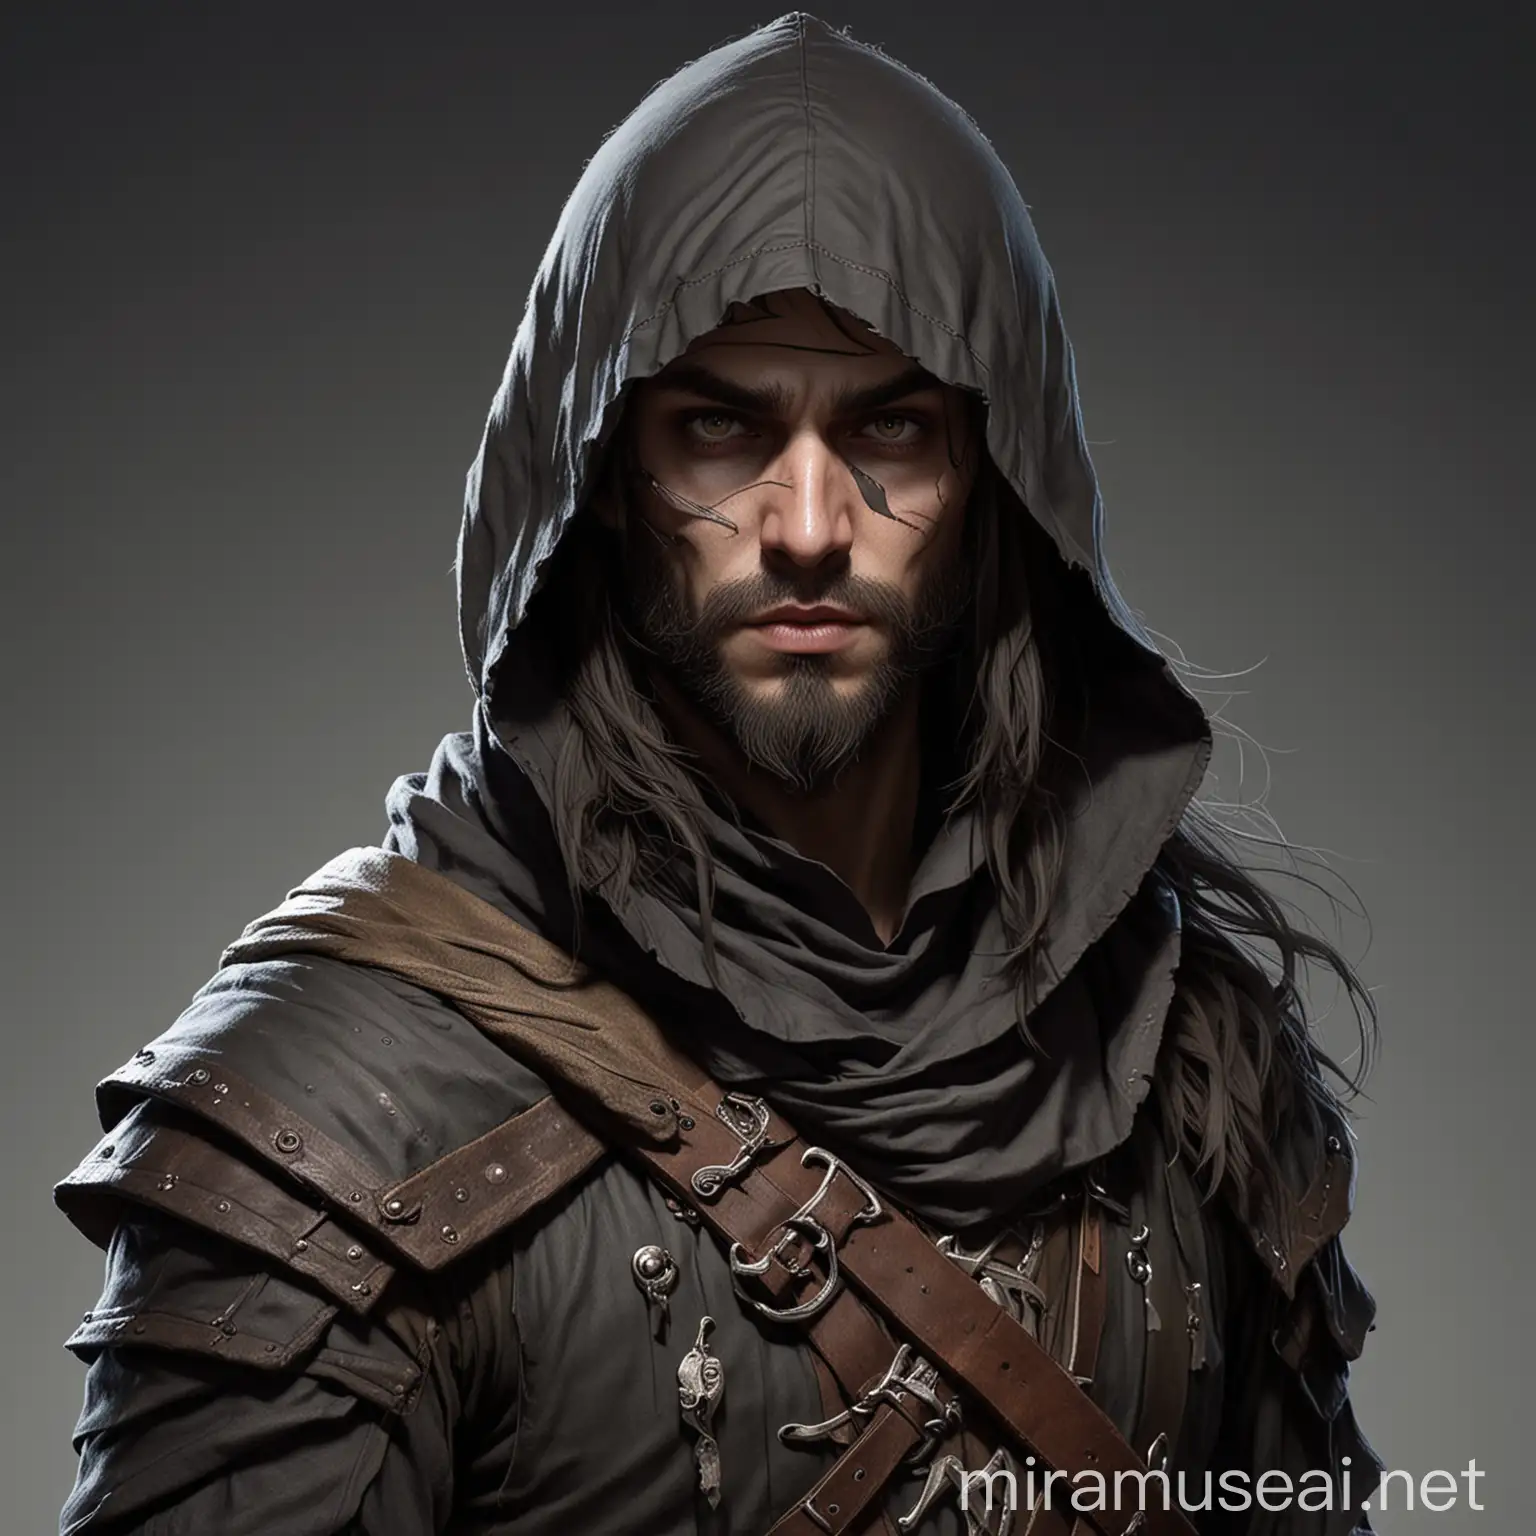 HalfElf Rogue Assassin with Hood and Face Mask